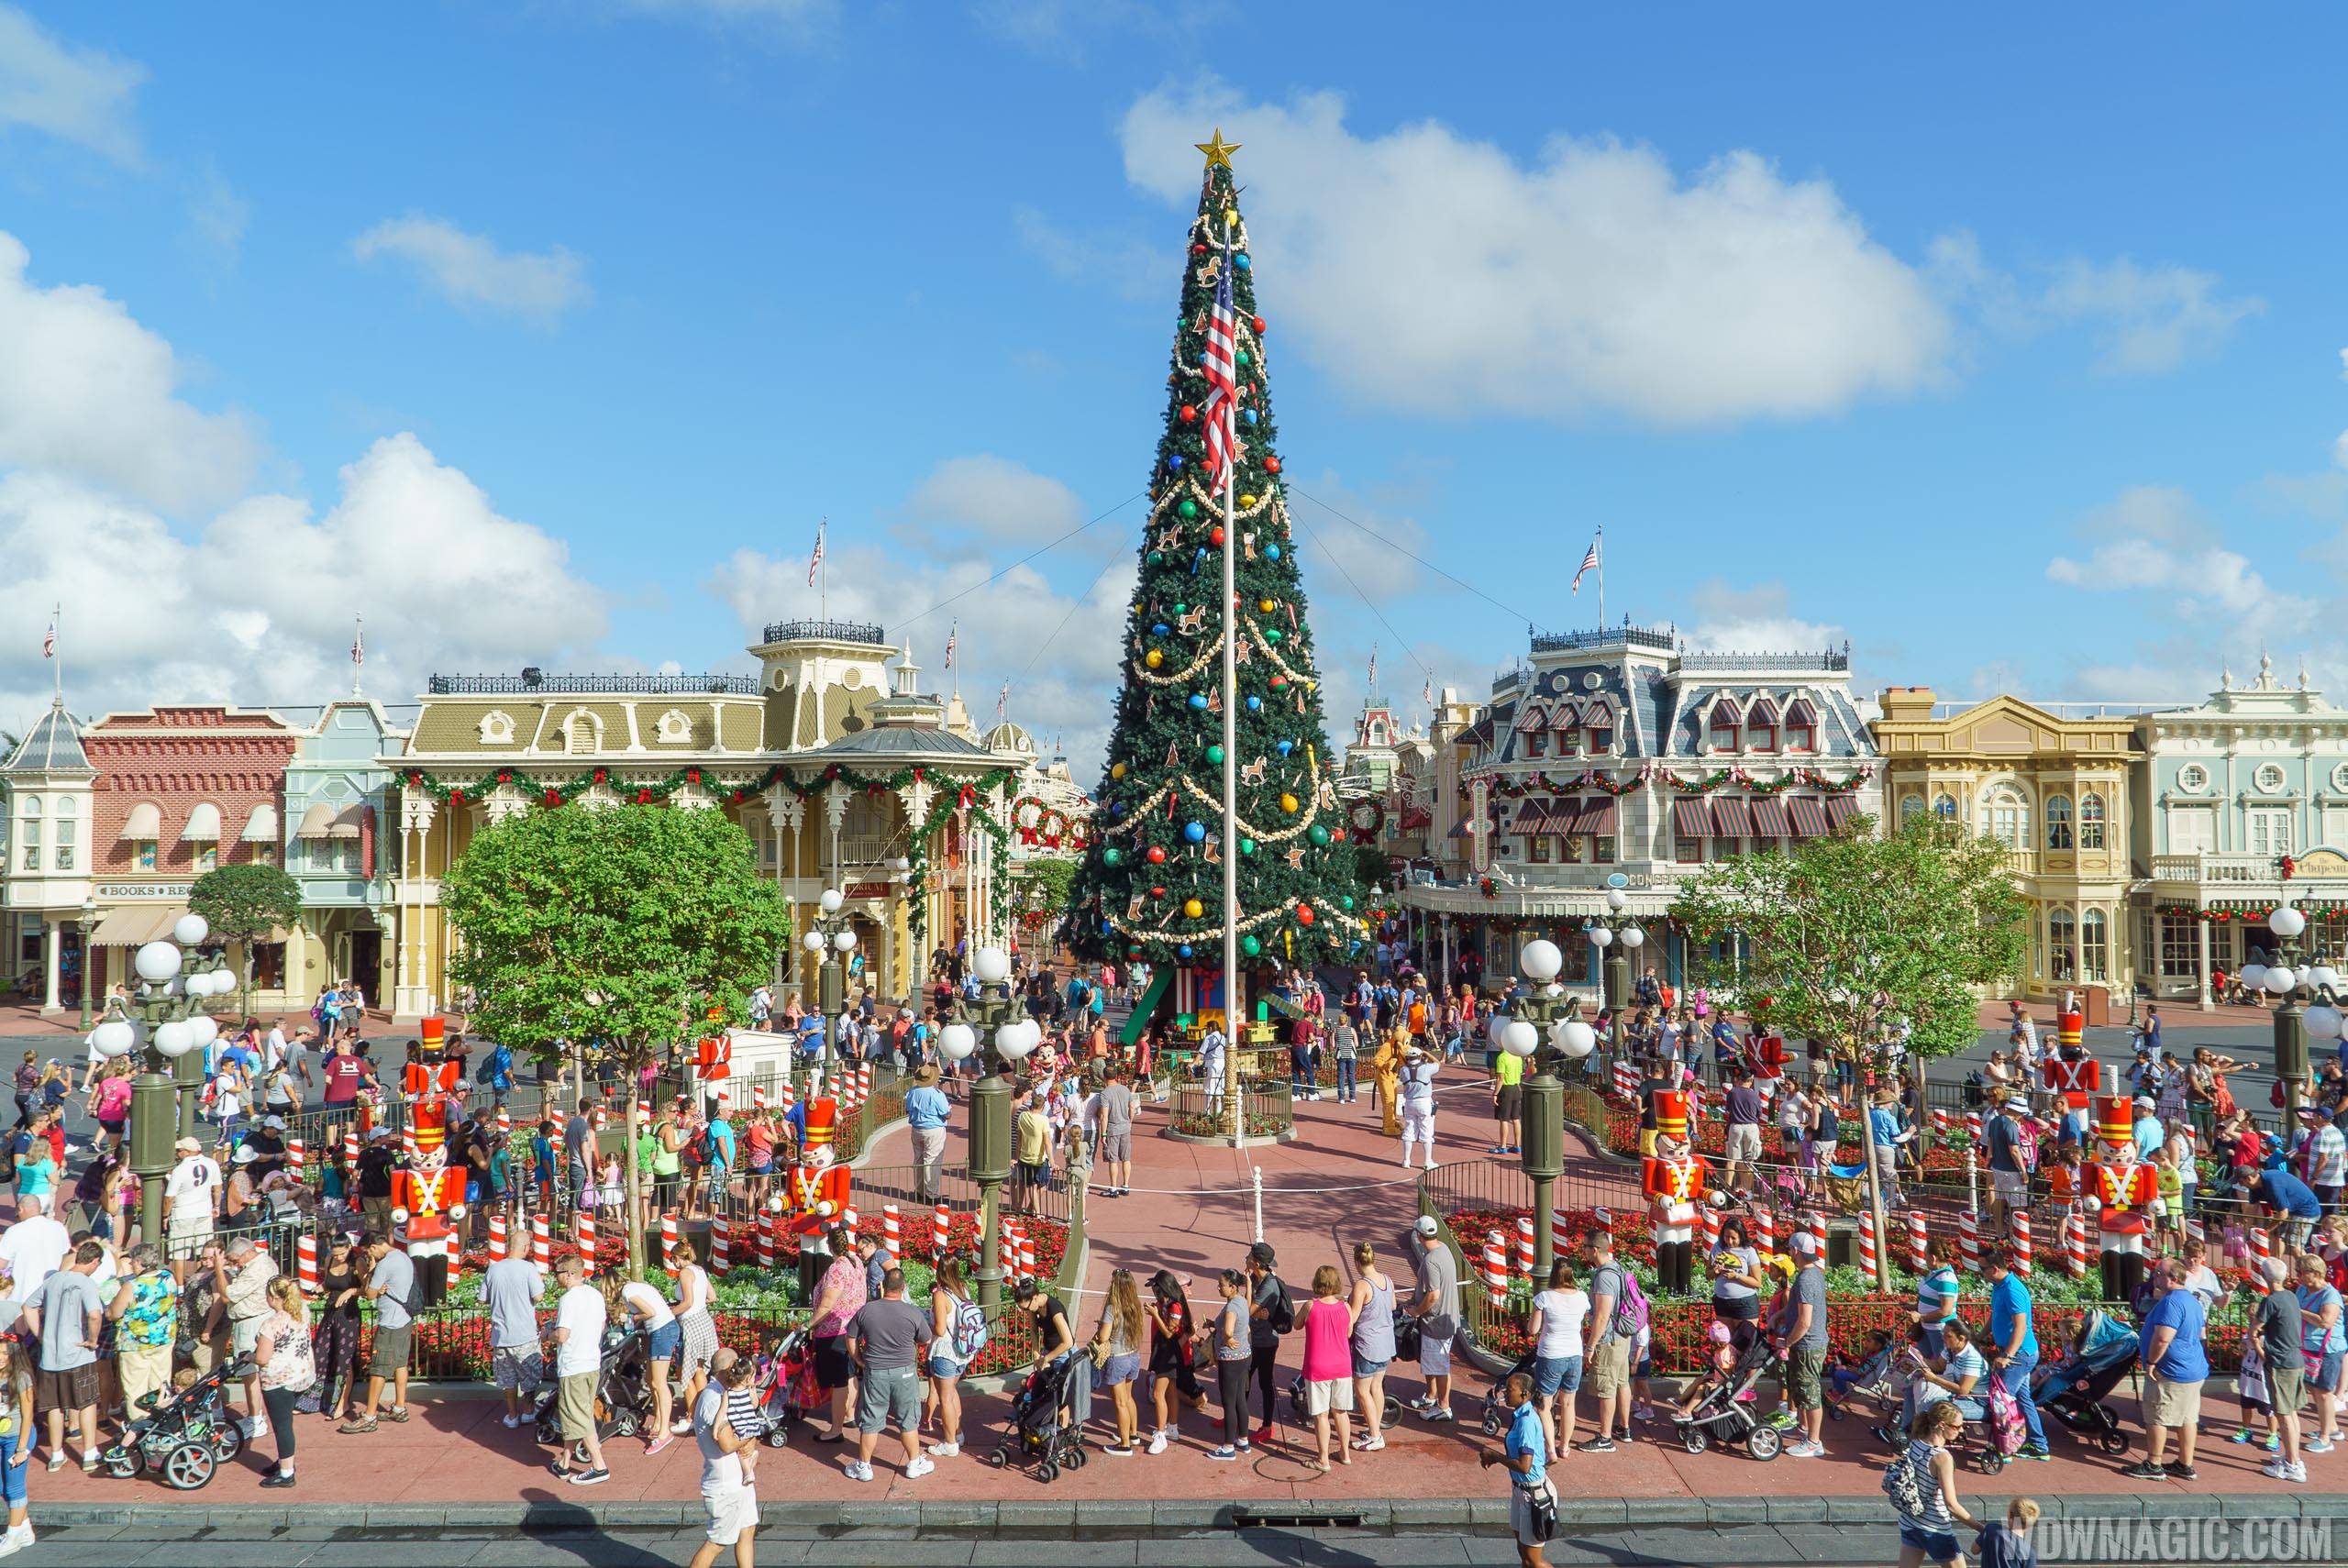 PHOTOS - Holidays get underway at the Magic Kingdom complete with Christmas Tree